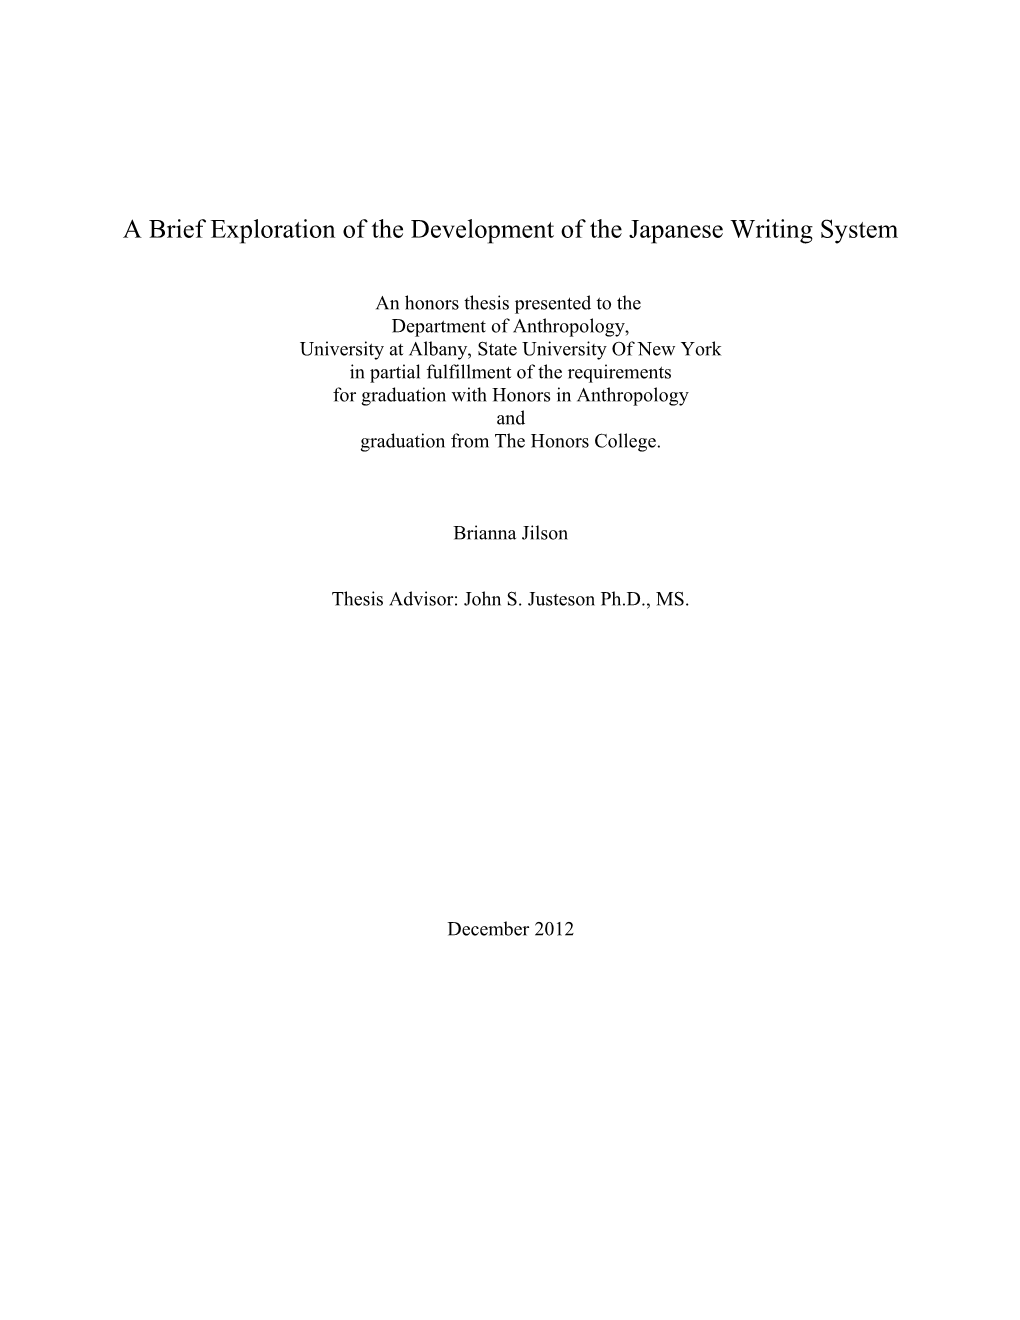 A Brief Exploration of the Development of the Japanese Writing System